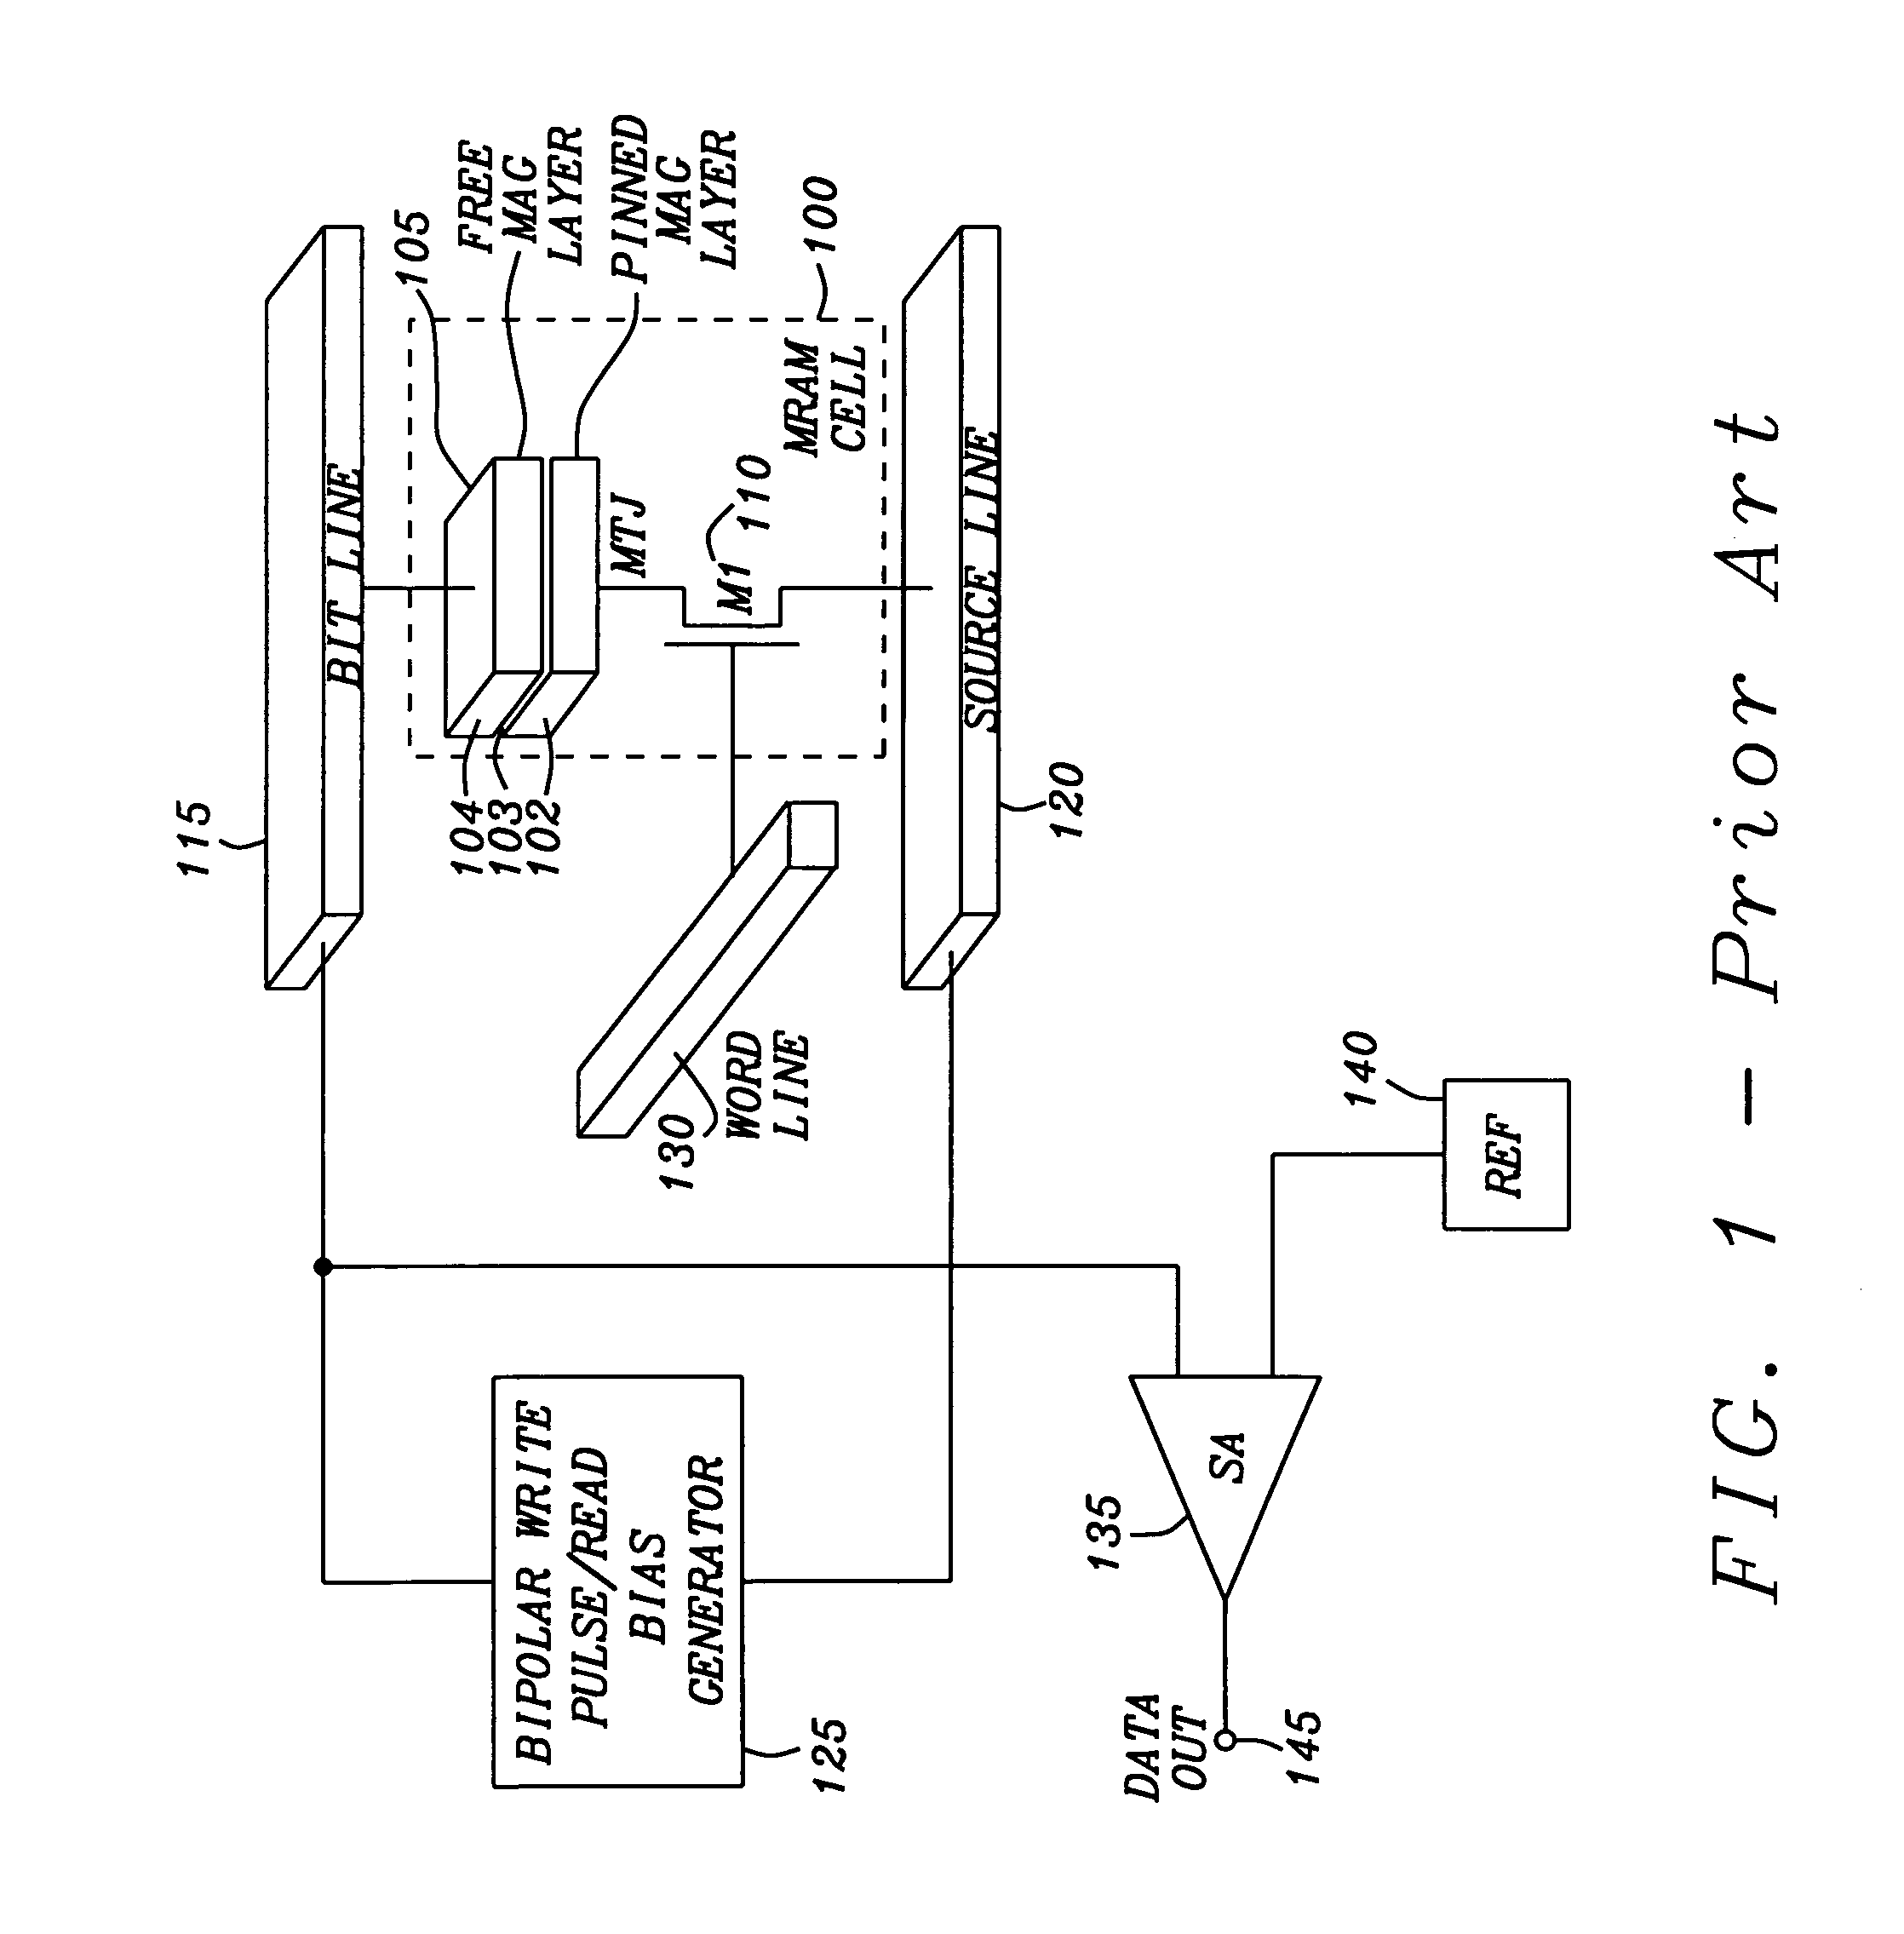 Method and apparatus for scrubbing accumulated data errors from a memory system